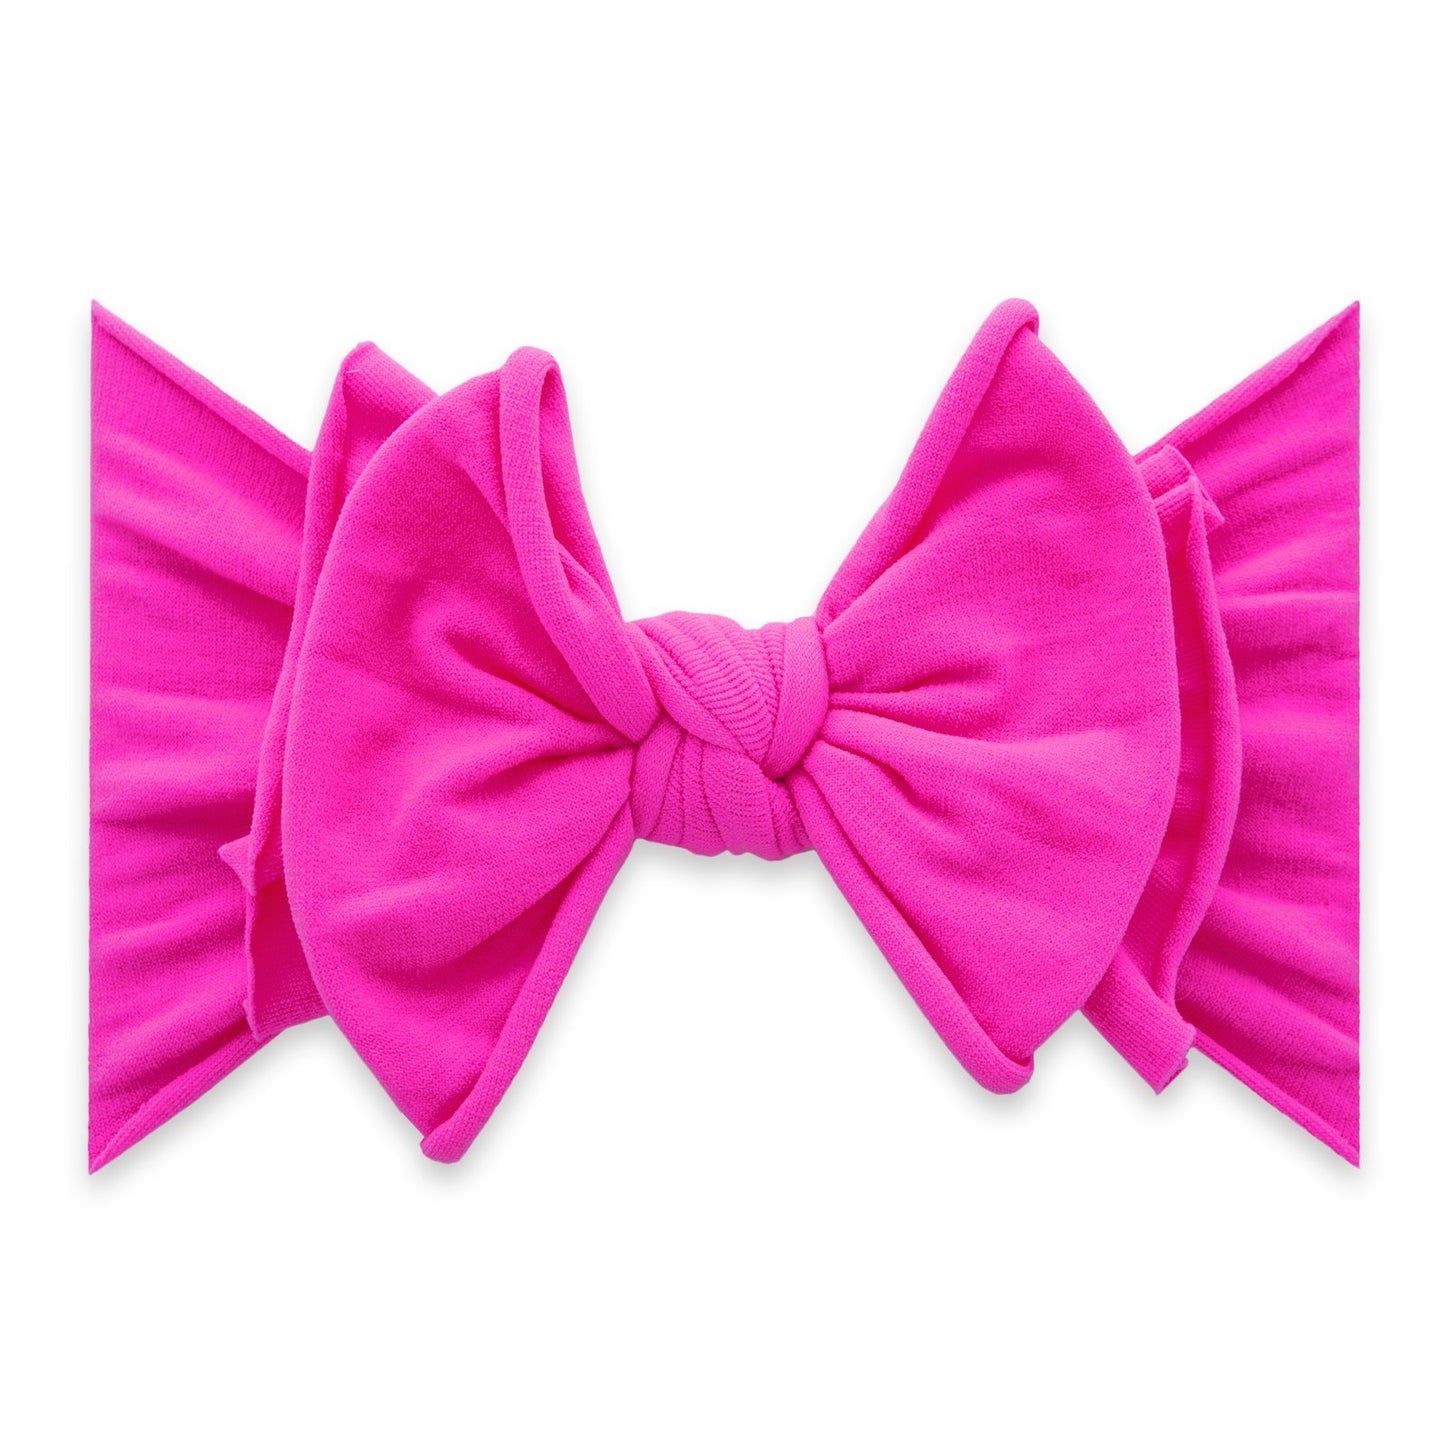 FAB-BOW-LOUS - Neon Pink